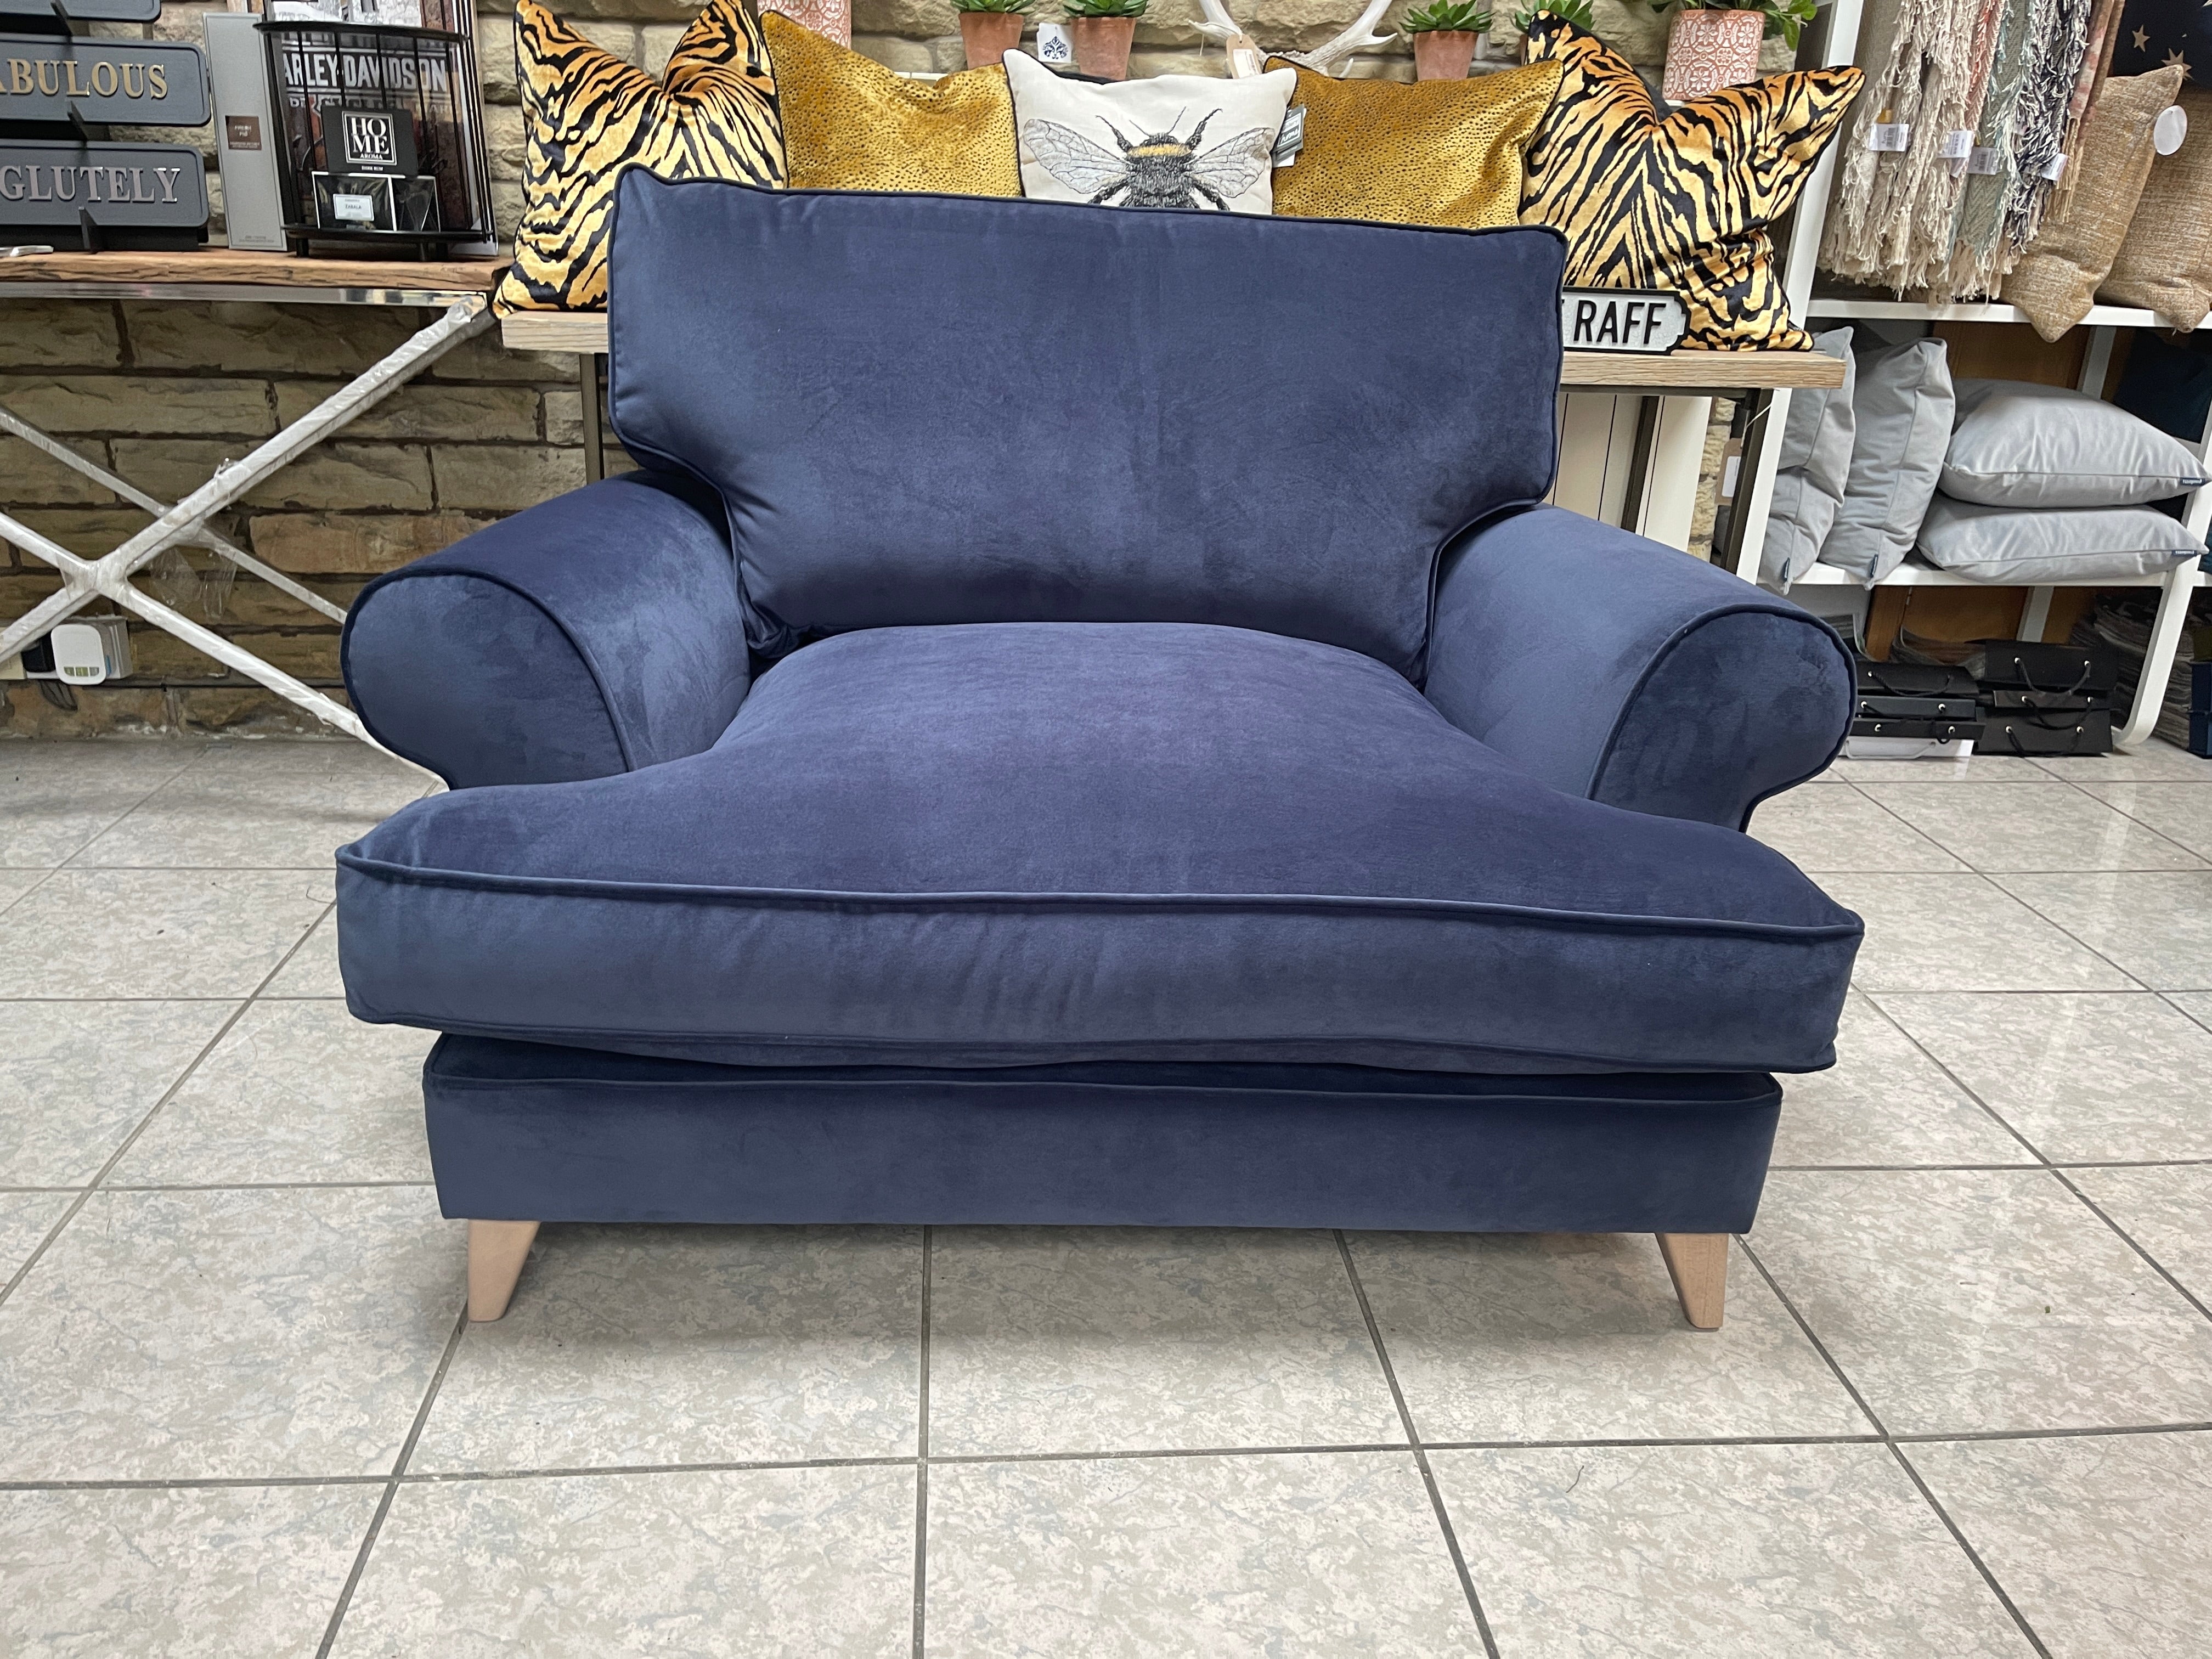 THE LOUNGE COMPANY BRIONY large style loveseat in royal blue velvet fabric